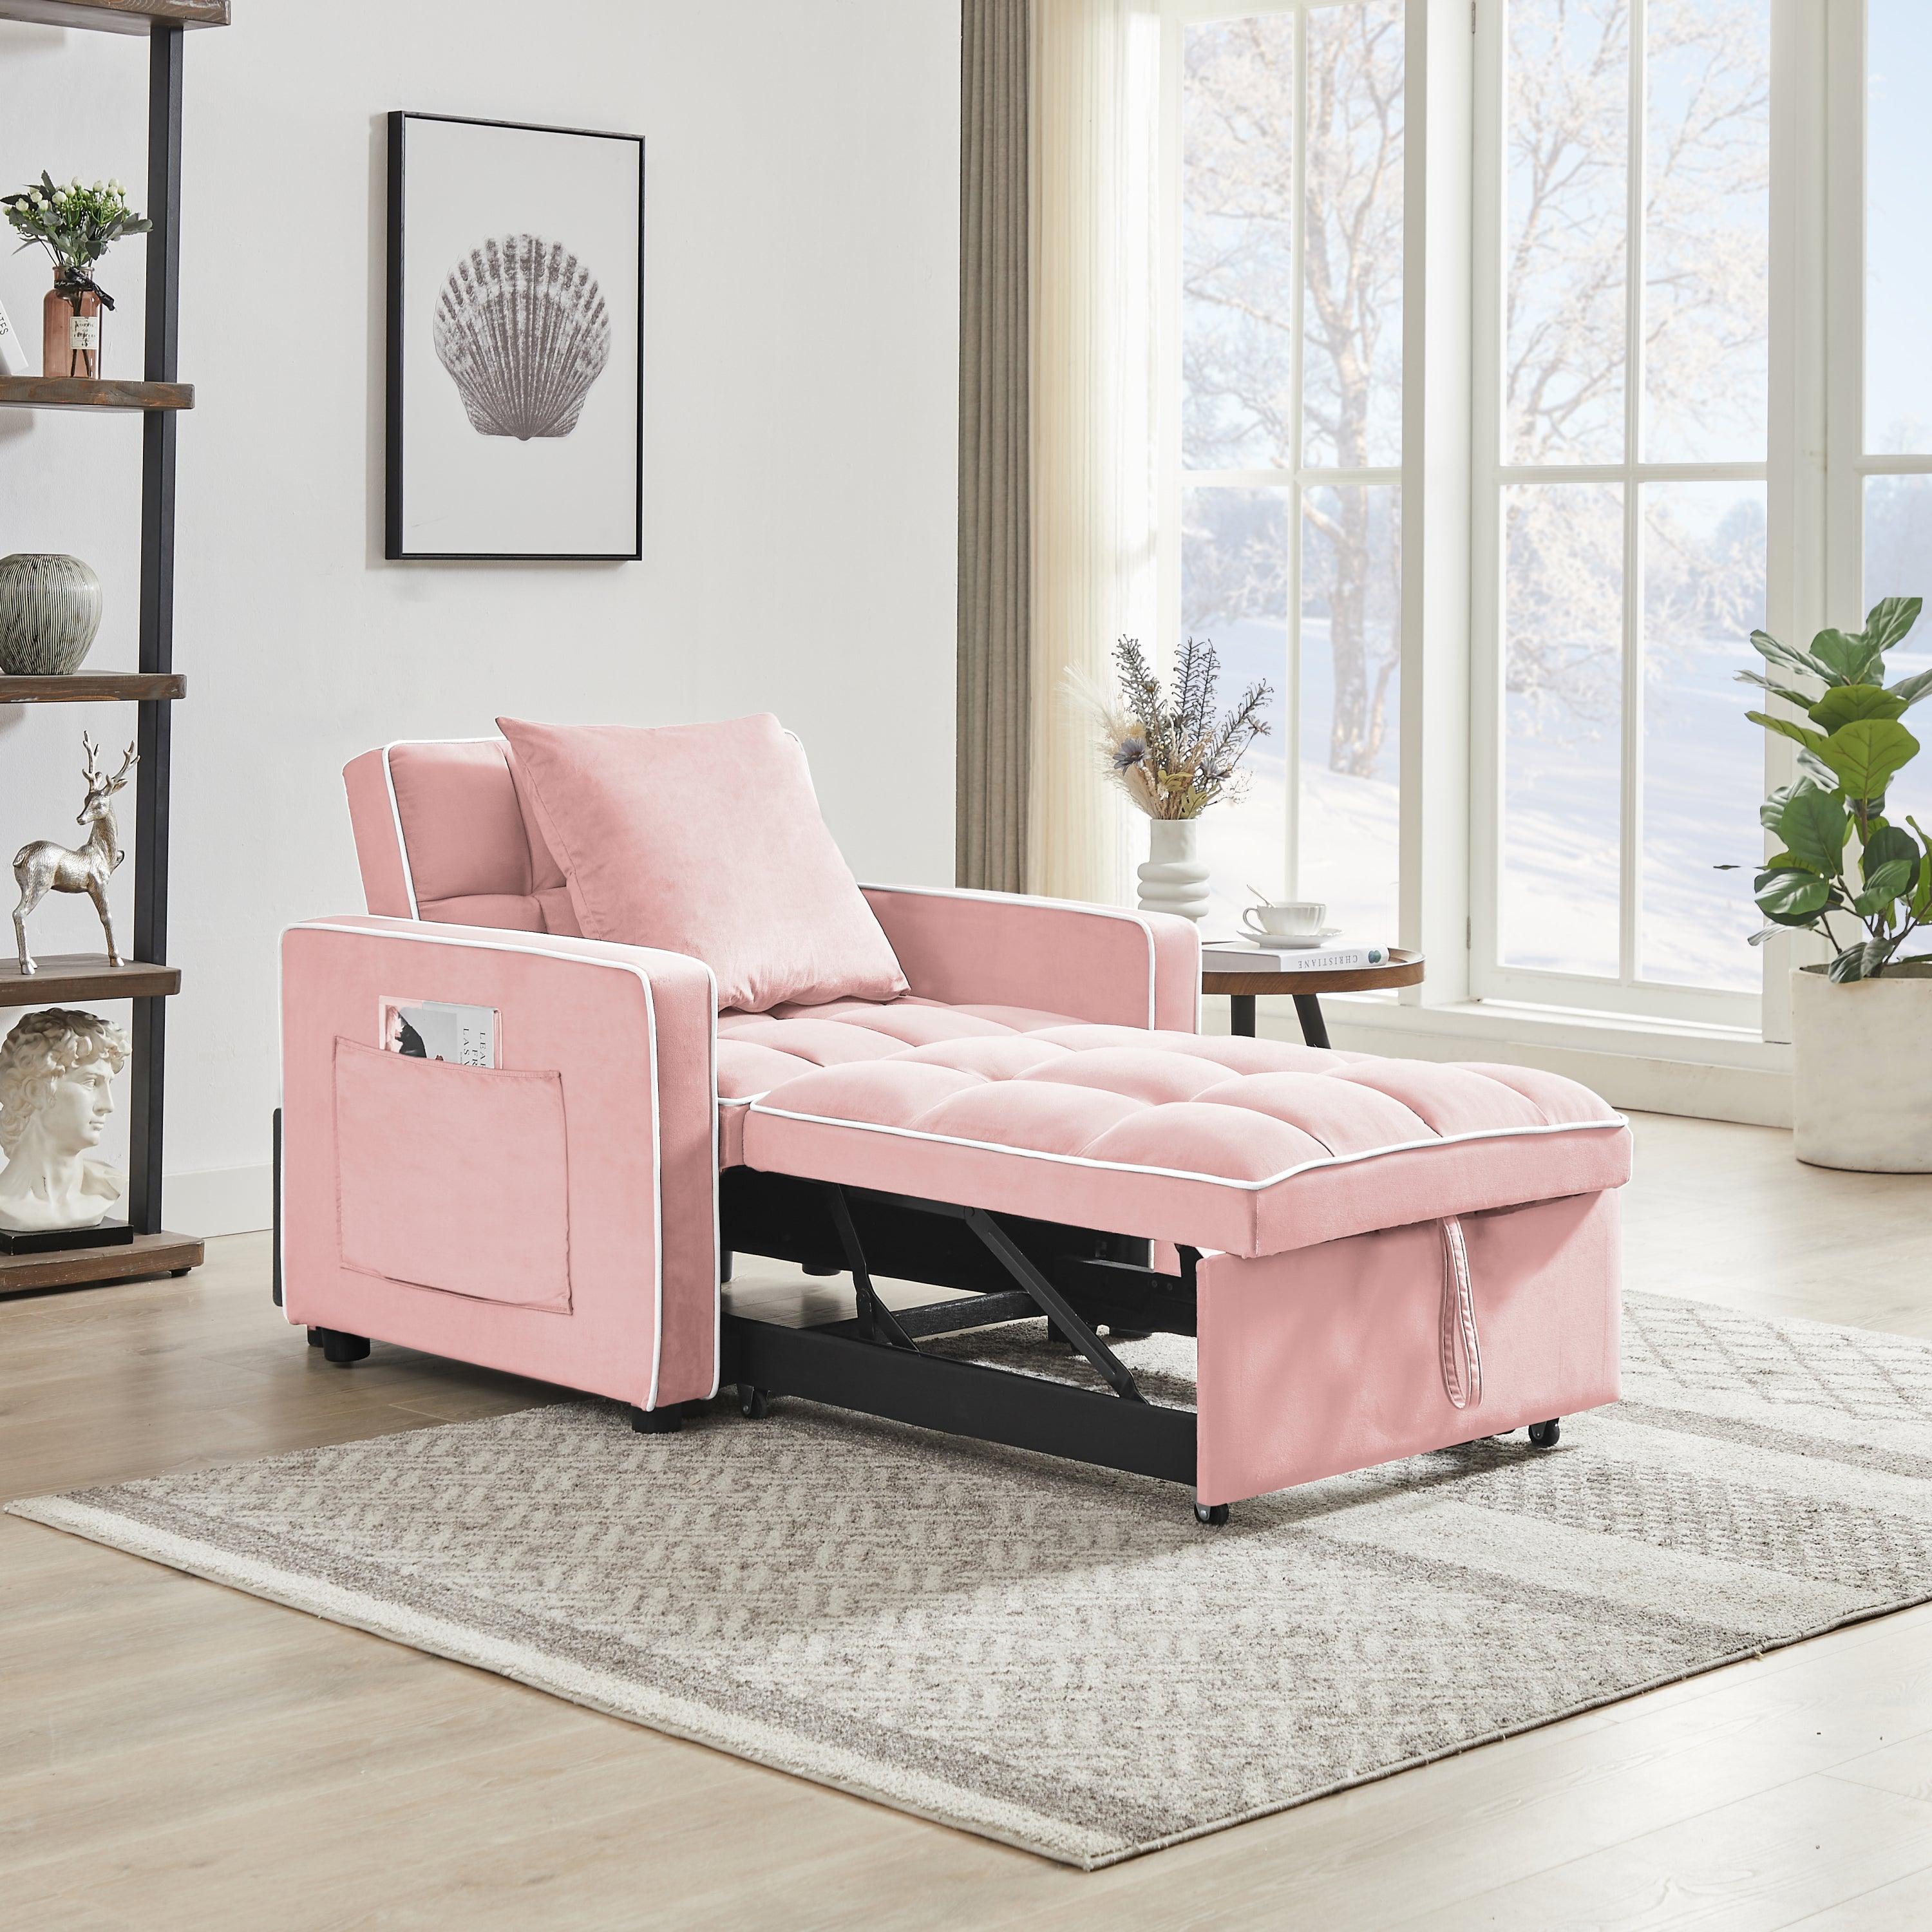 🆓🚛 3-in-1 Sofa Bed Chair Adjustable Back Into a Sofa Recliner Single Bed, Pink